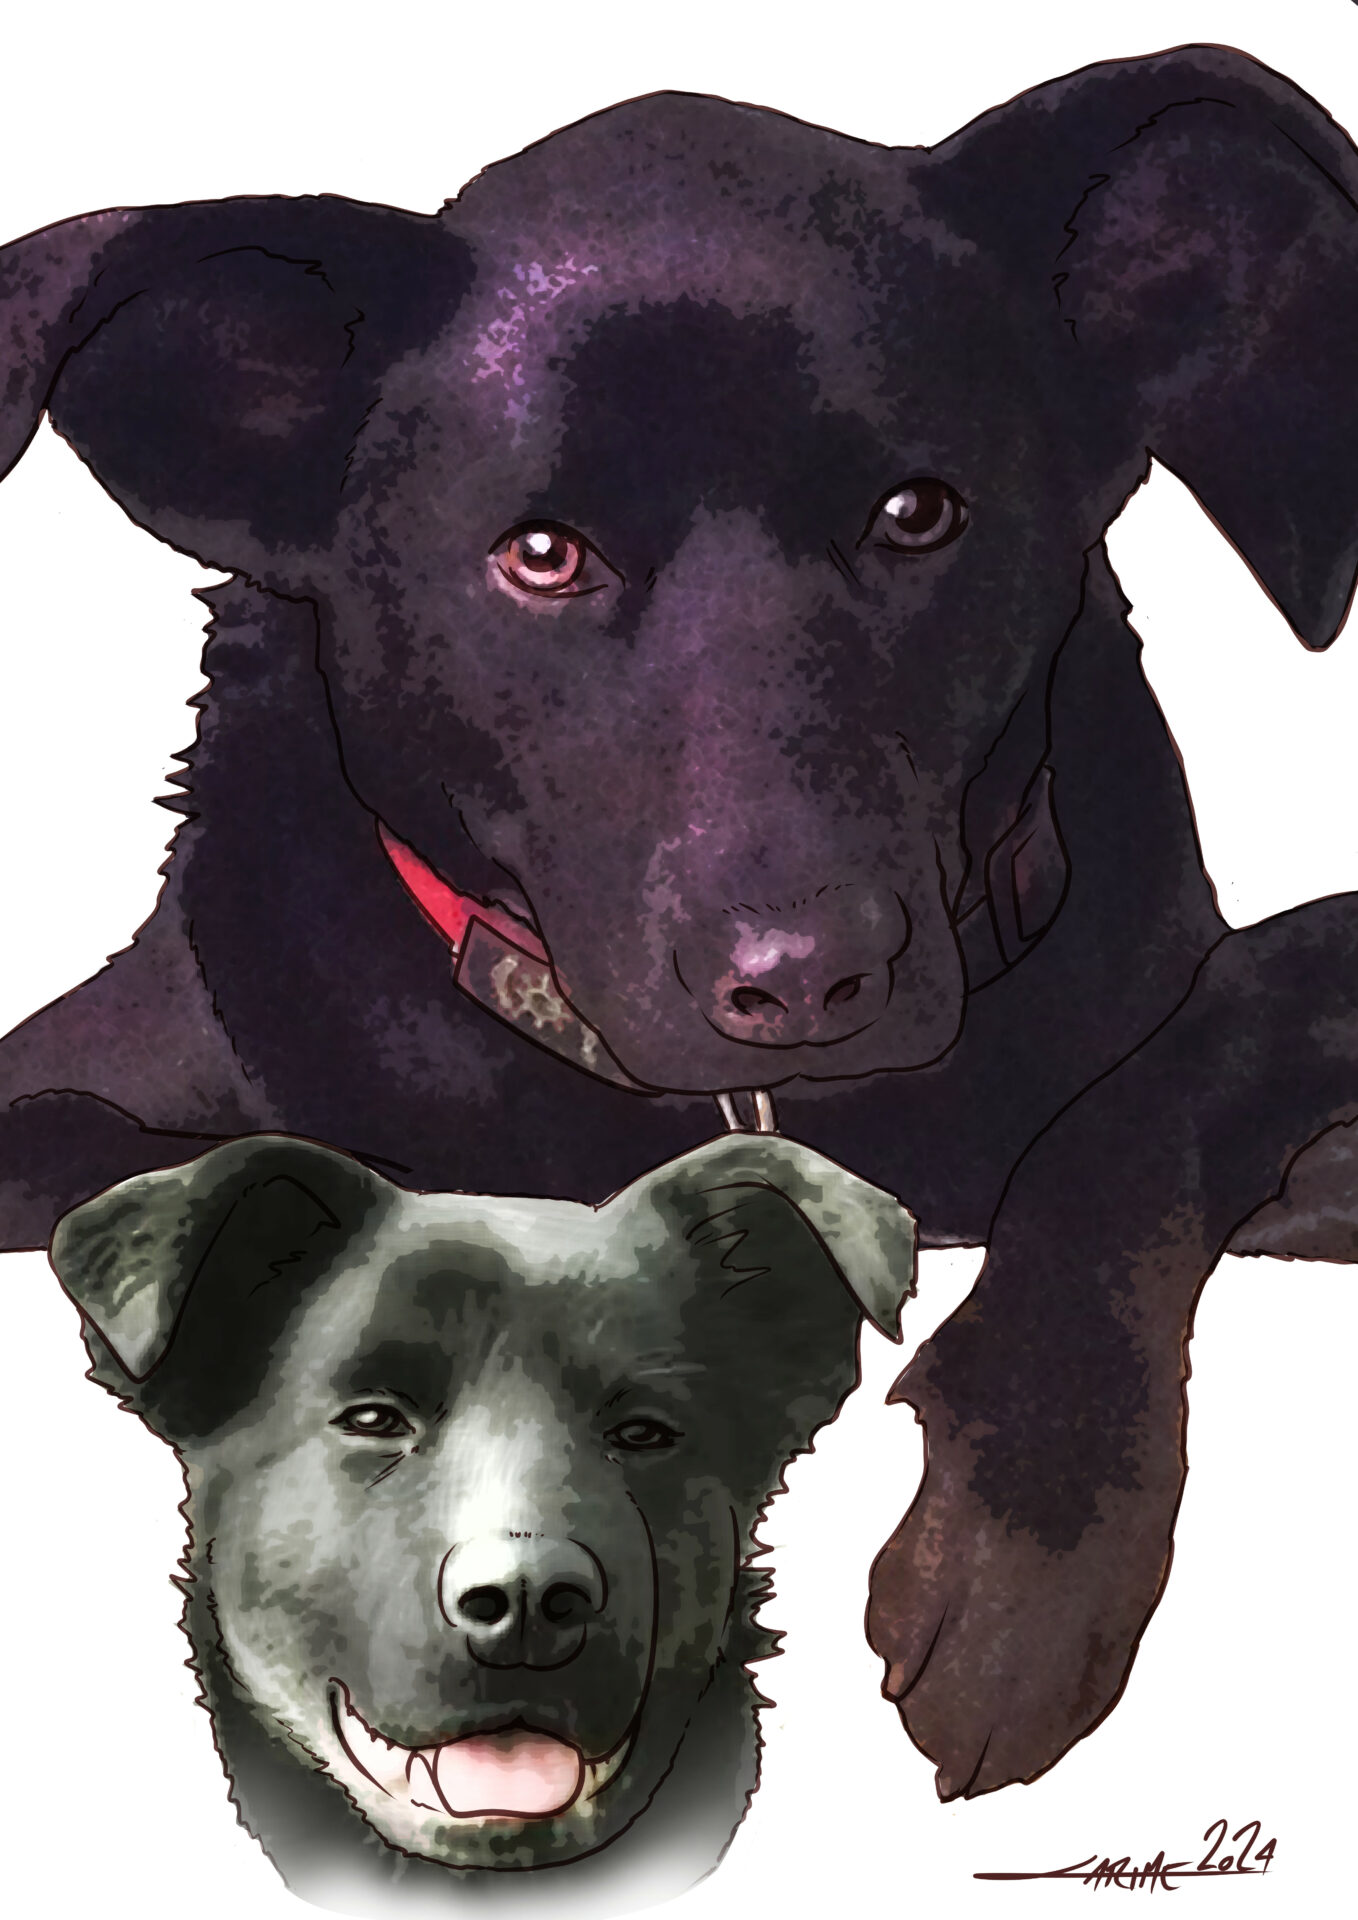 Pet portrait of my black Lab mix Rosie. The bottom picture is a of a grinning 3 month old black Lab mix, her ears up with the tips flopped over, and her tongue partially sticking out. The upper picture is of an adult Rosie. Her red collar is visible, as is her front left paw. She has her ears pricked up with the tips flopped over. Her eyes are brown.